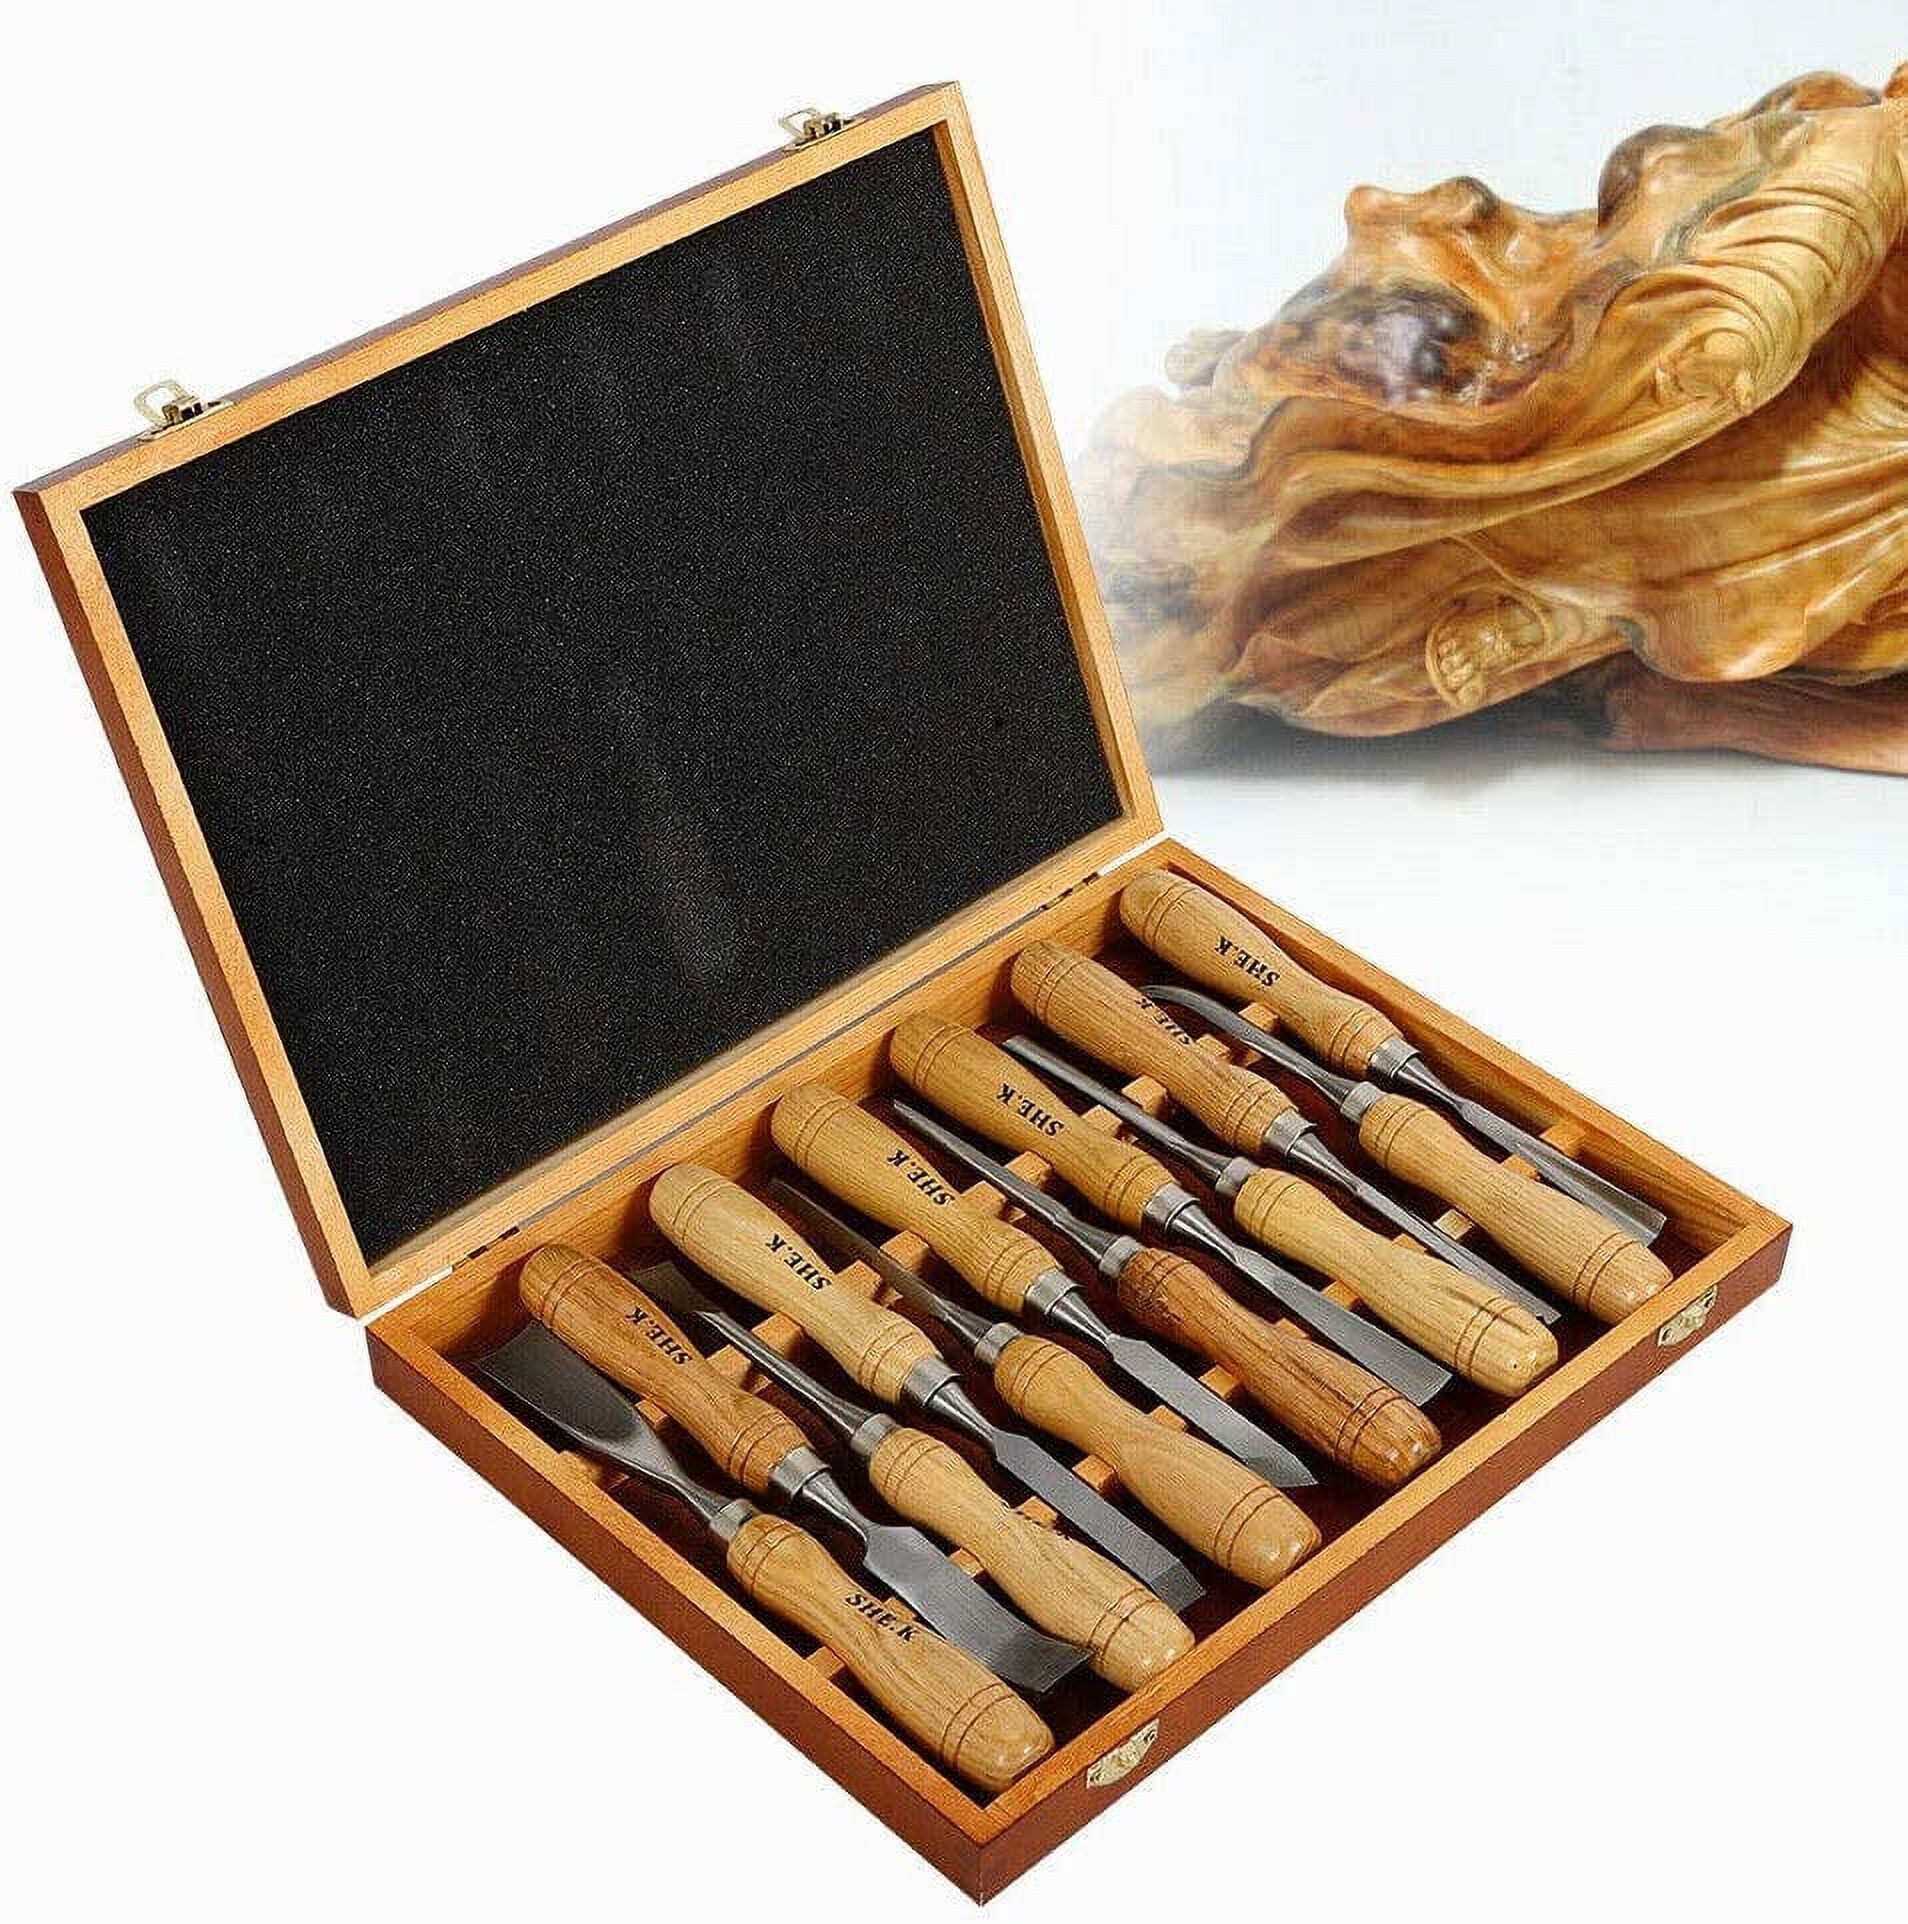 Deadwood Crafted Tools Wood Carving Tools Kit - 12pc Gouge and Wood Carving  Chisel Set with Wood Handles and Canvas Case